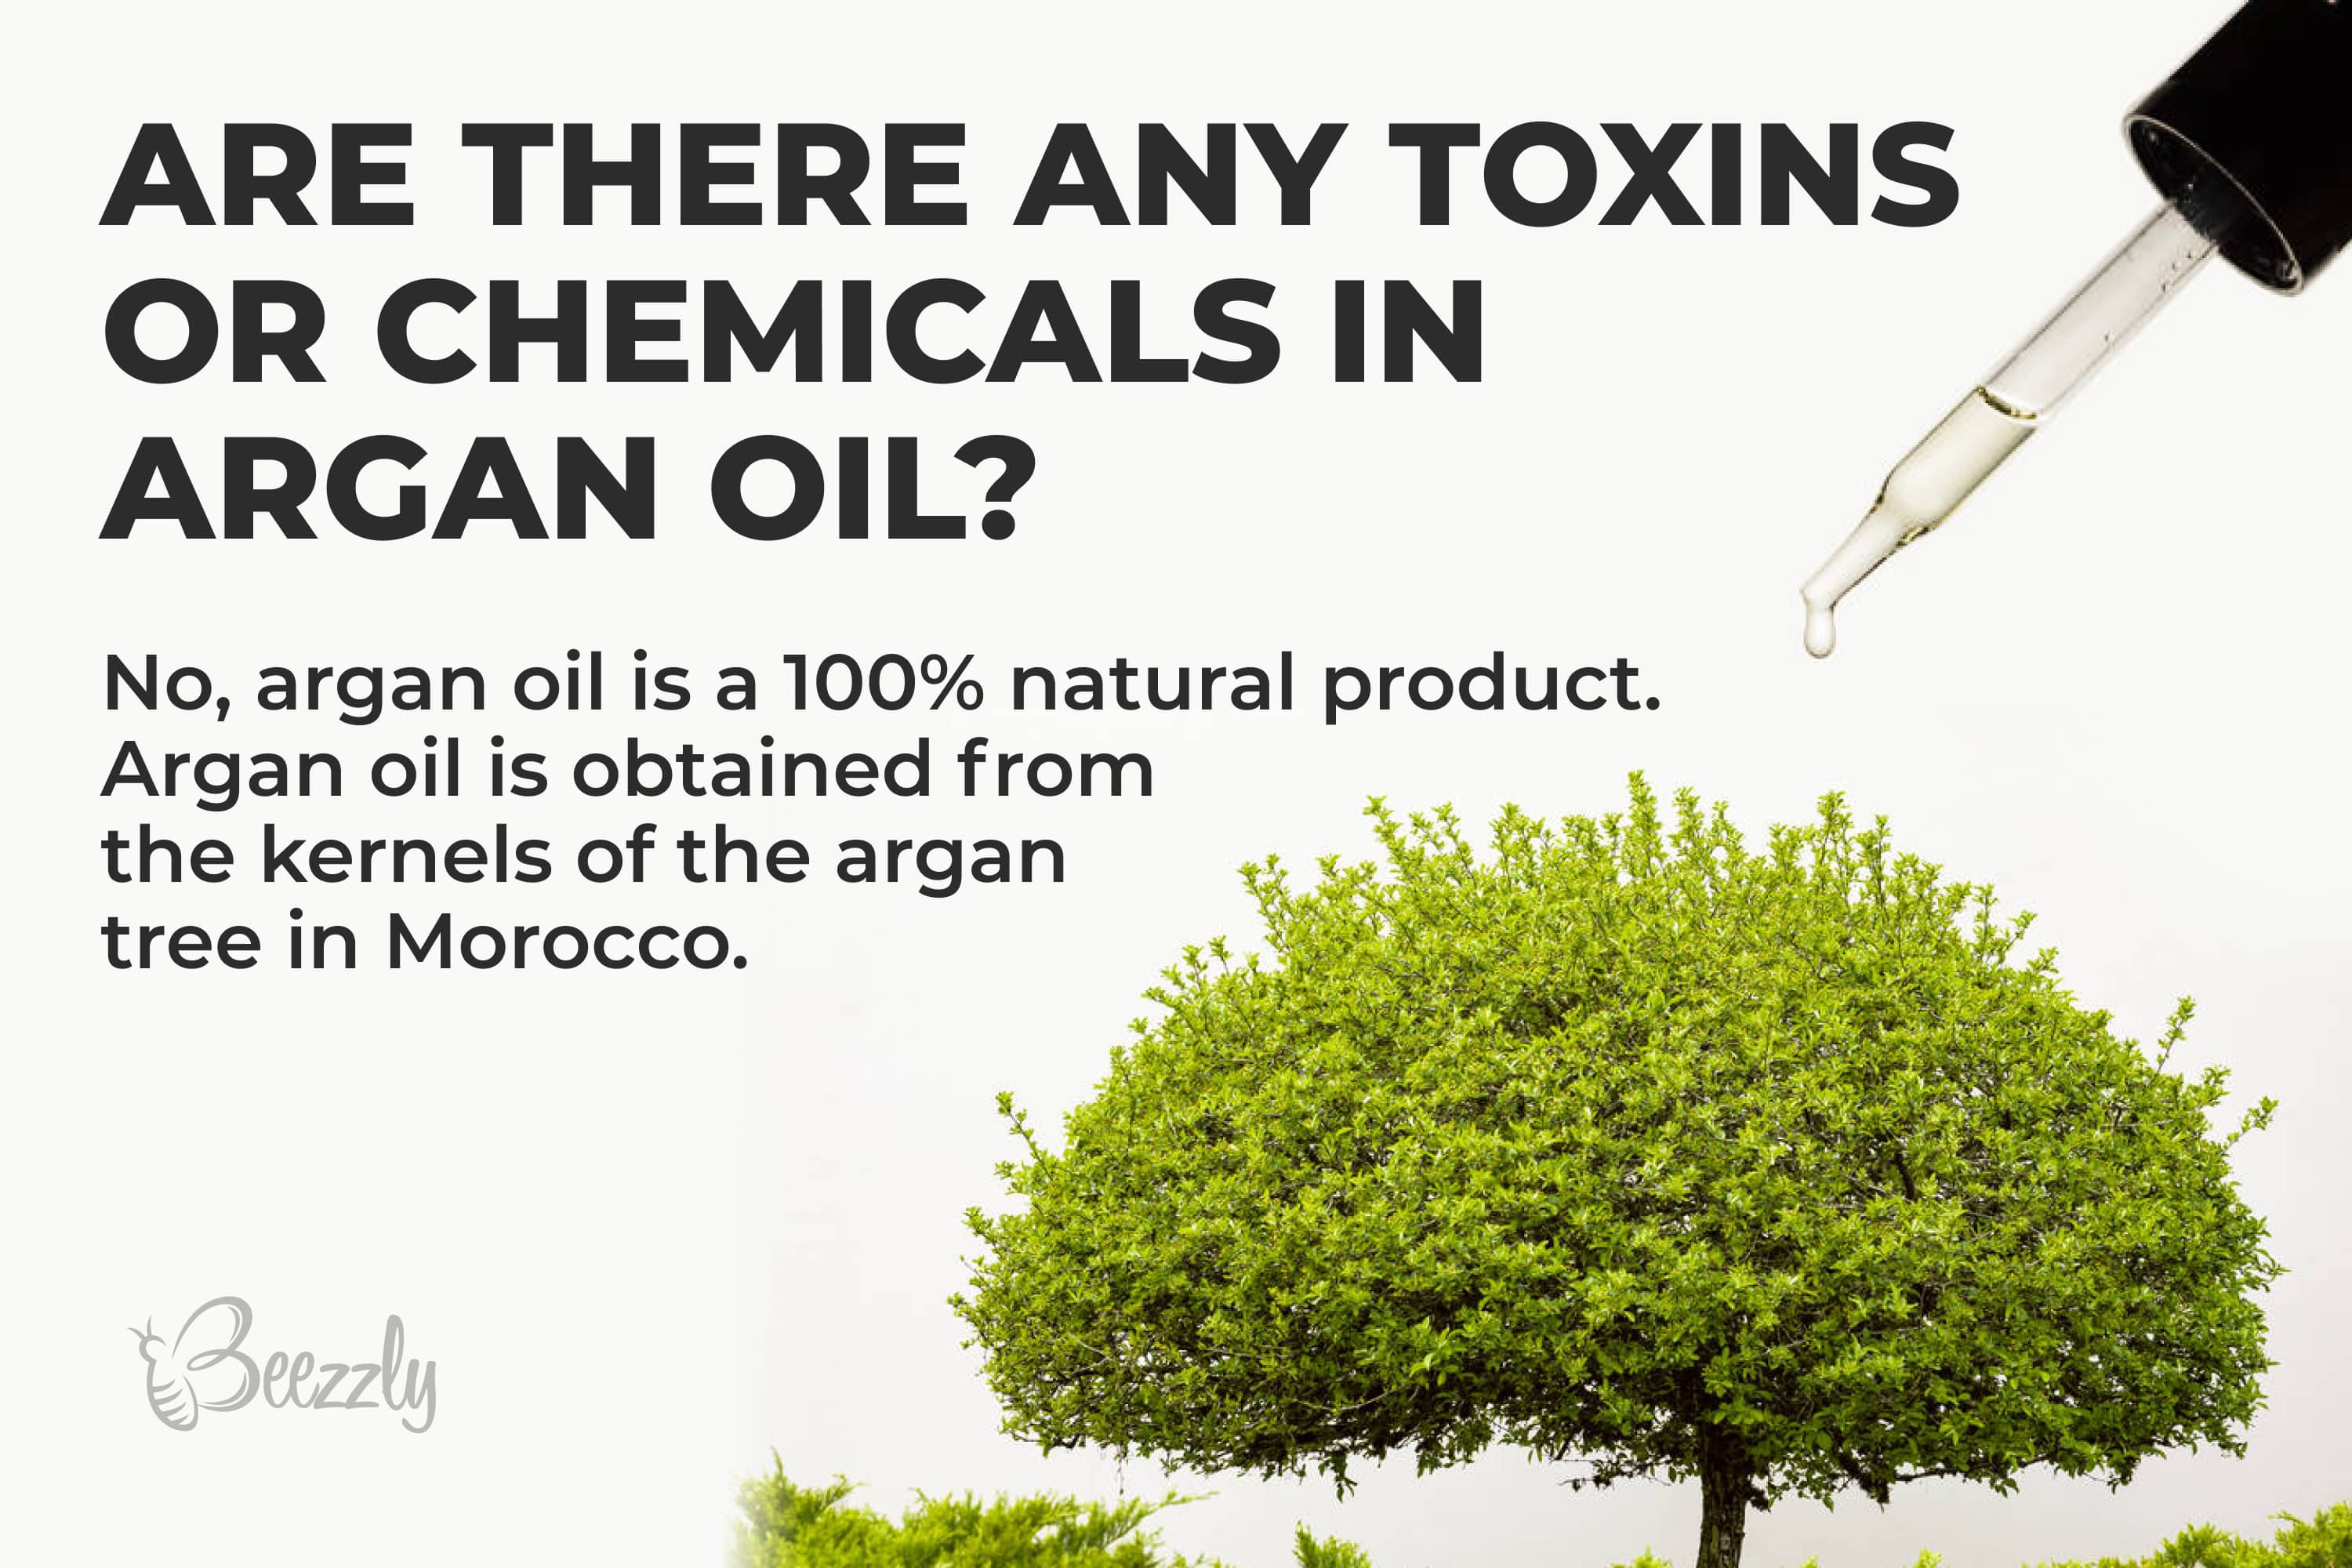 Are there any toxins or chemicals in argan oil